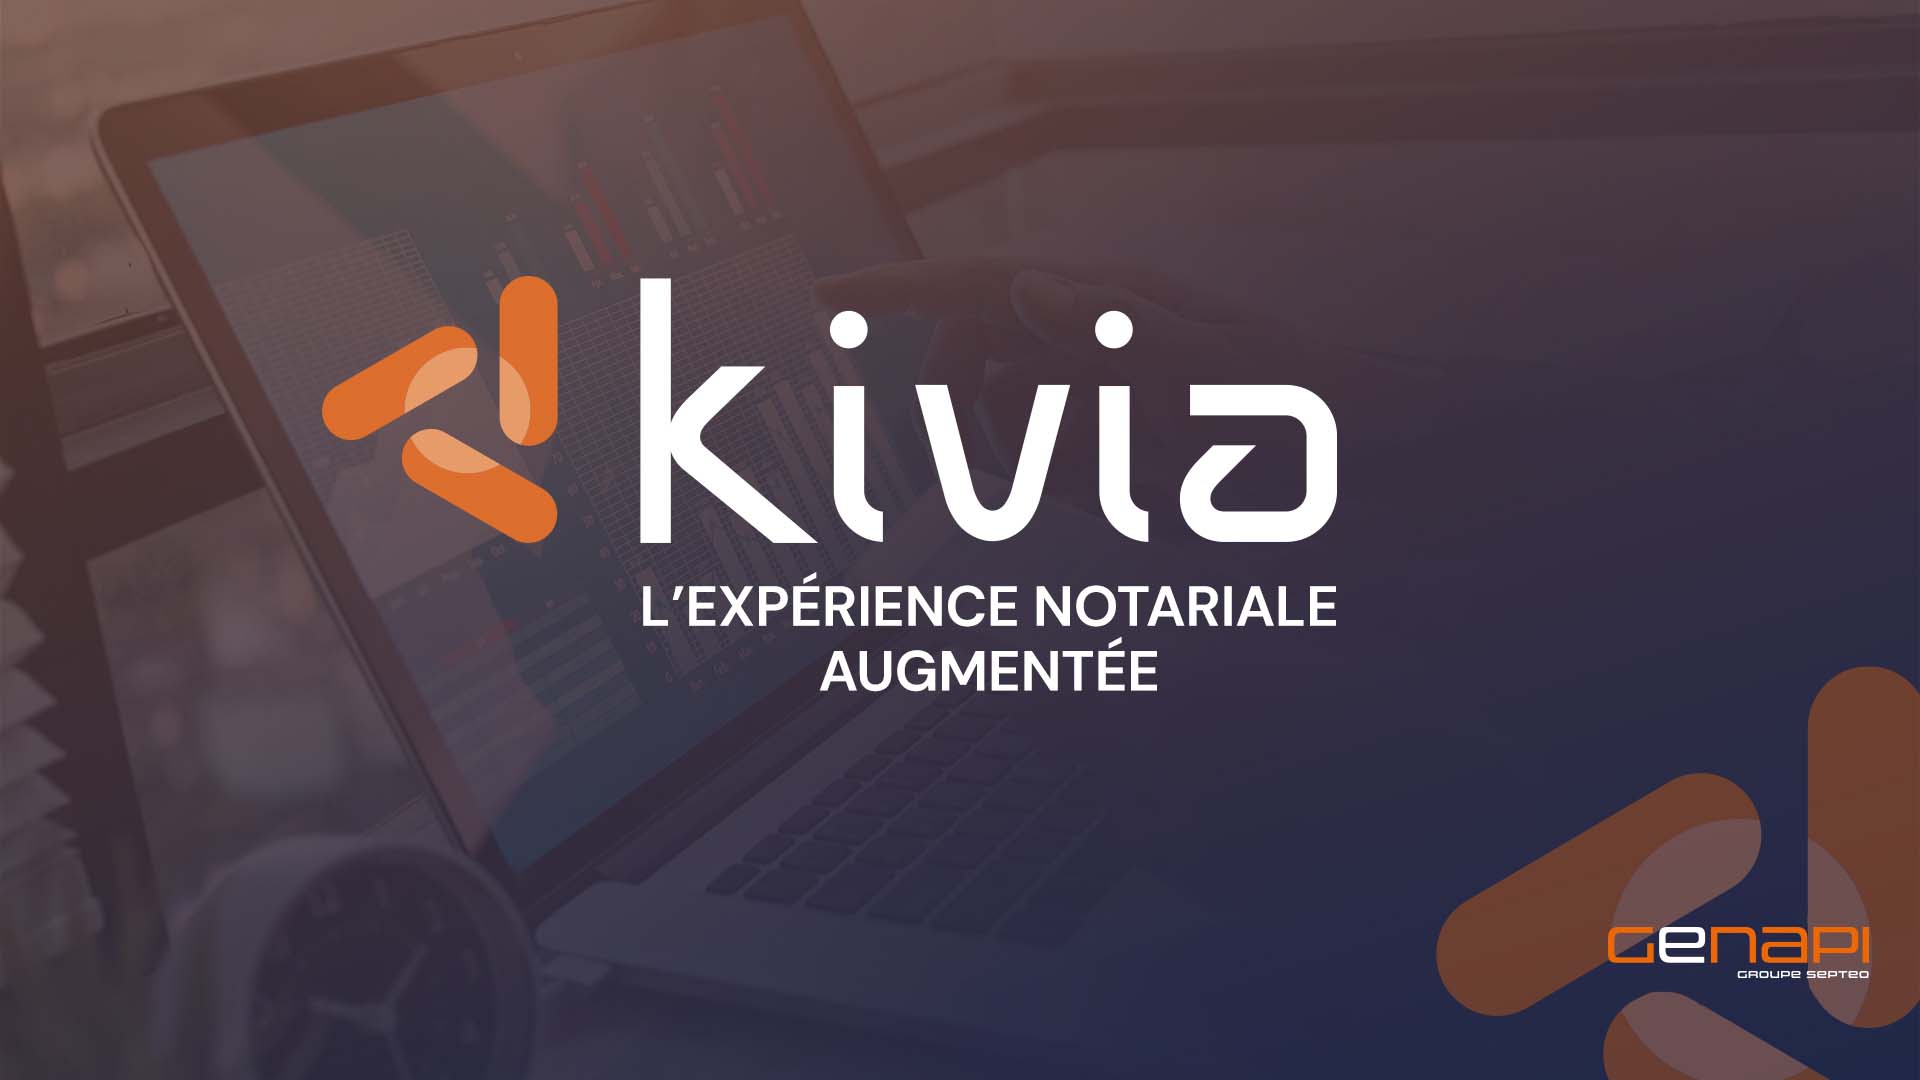 Genapi Septeo Group leads the notary profession into the era of 3.0 with the new software program KIVIA!